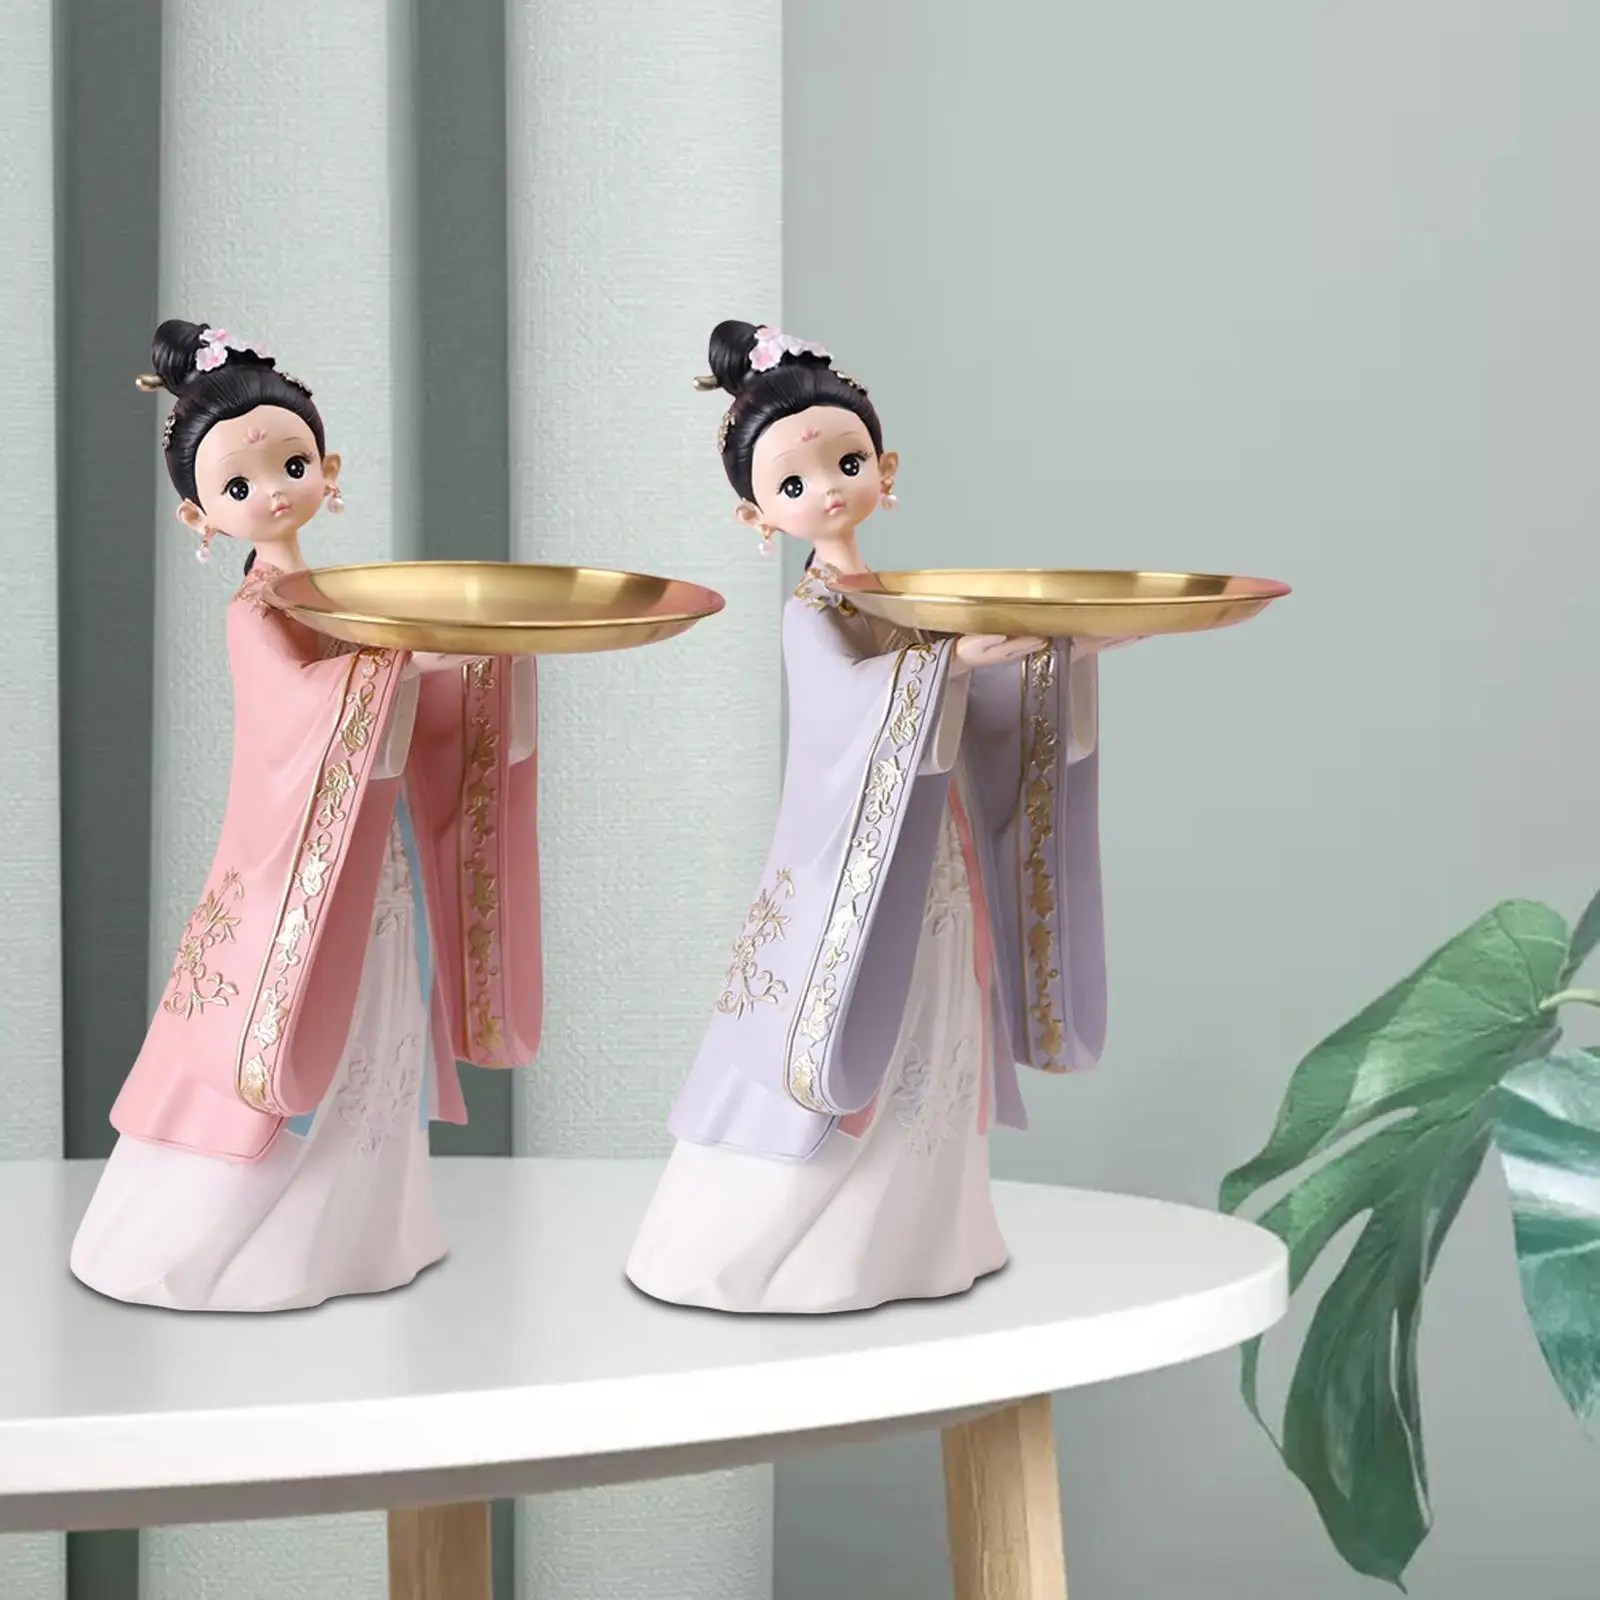 Girl Resin Statues Figurine Sculptures Jewelry Storage Counter Holder Decorative Serving Tray for Candy Table Decor Living Room